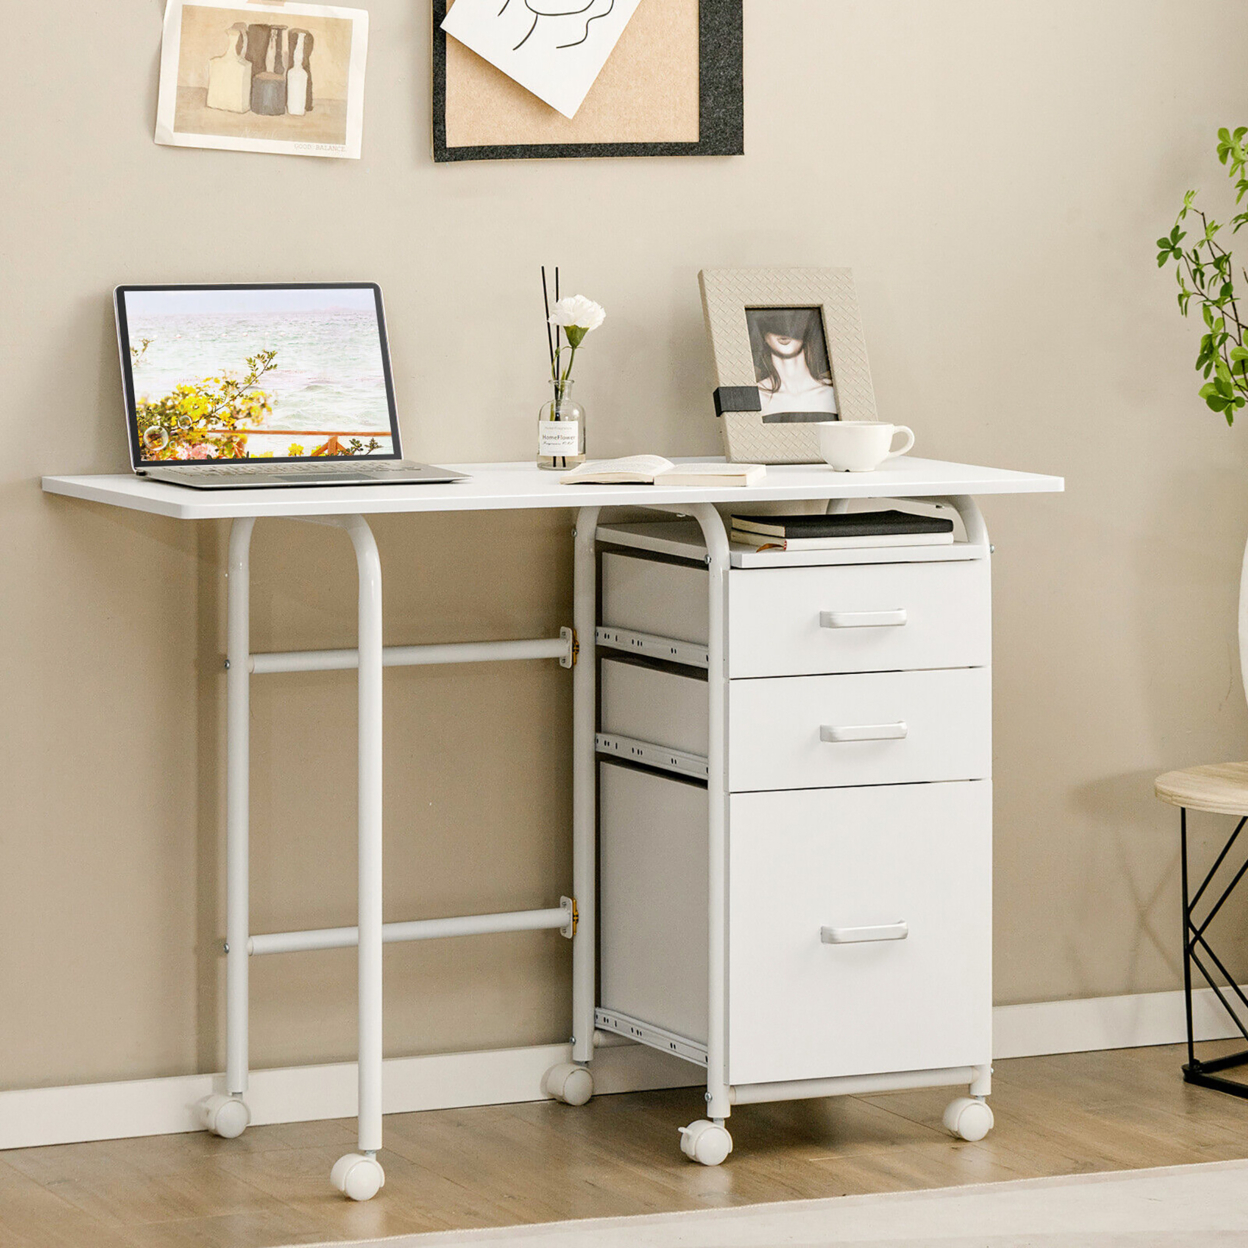 Folding Computer Laptop Desk Wheeled Home Office Furniture W/3 Drawers White